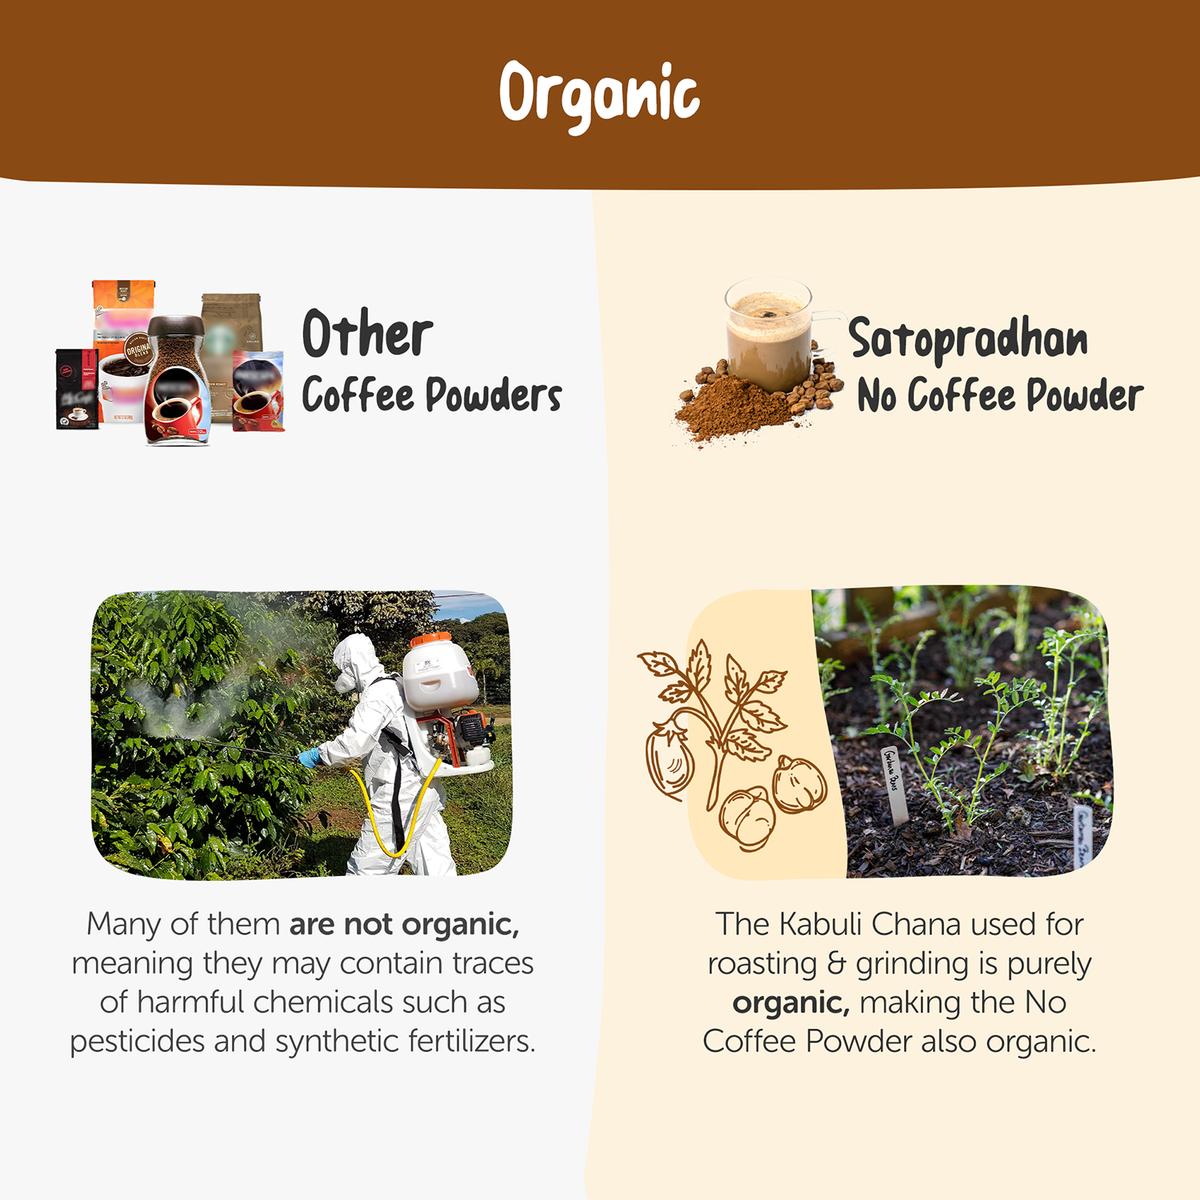 satopradhan no coffee powder is organically whrereas other powder contains traces of harmful chemicals